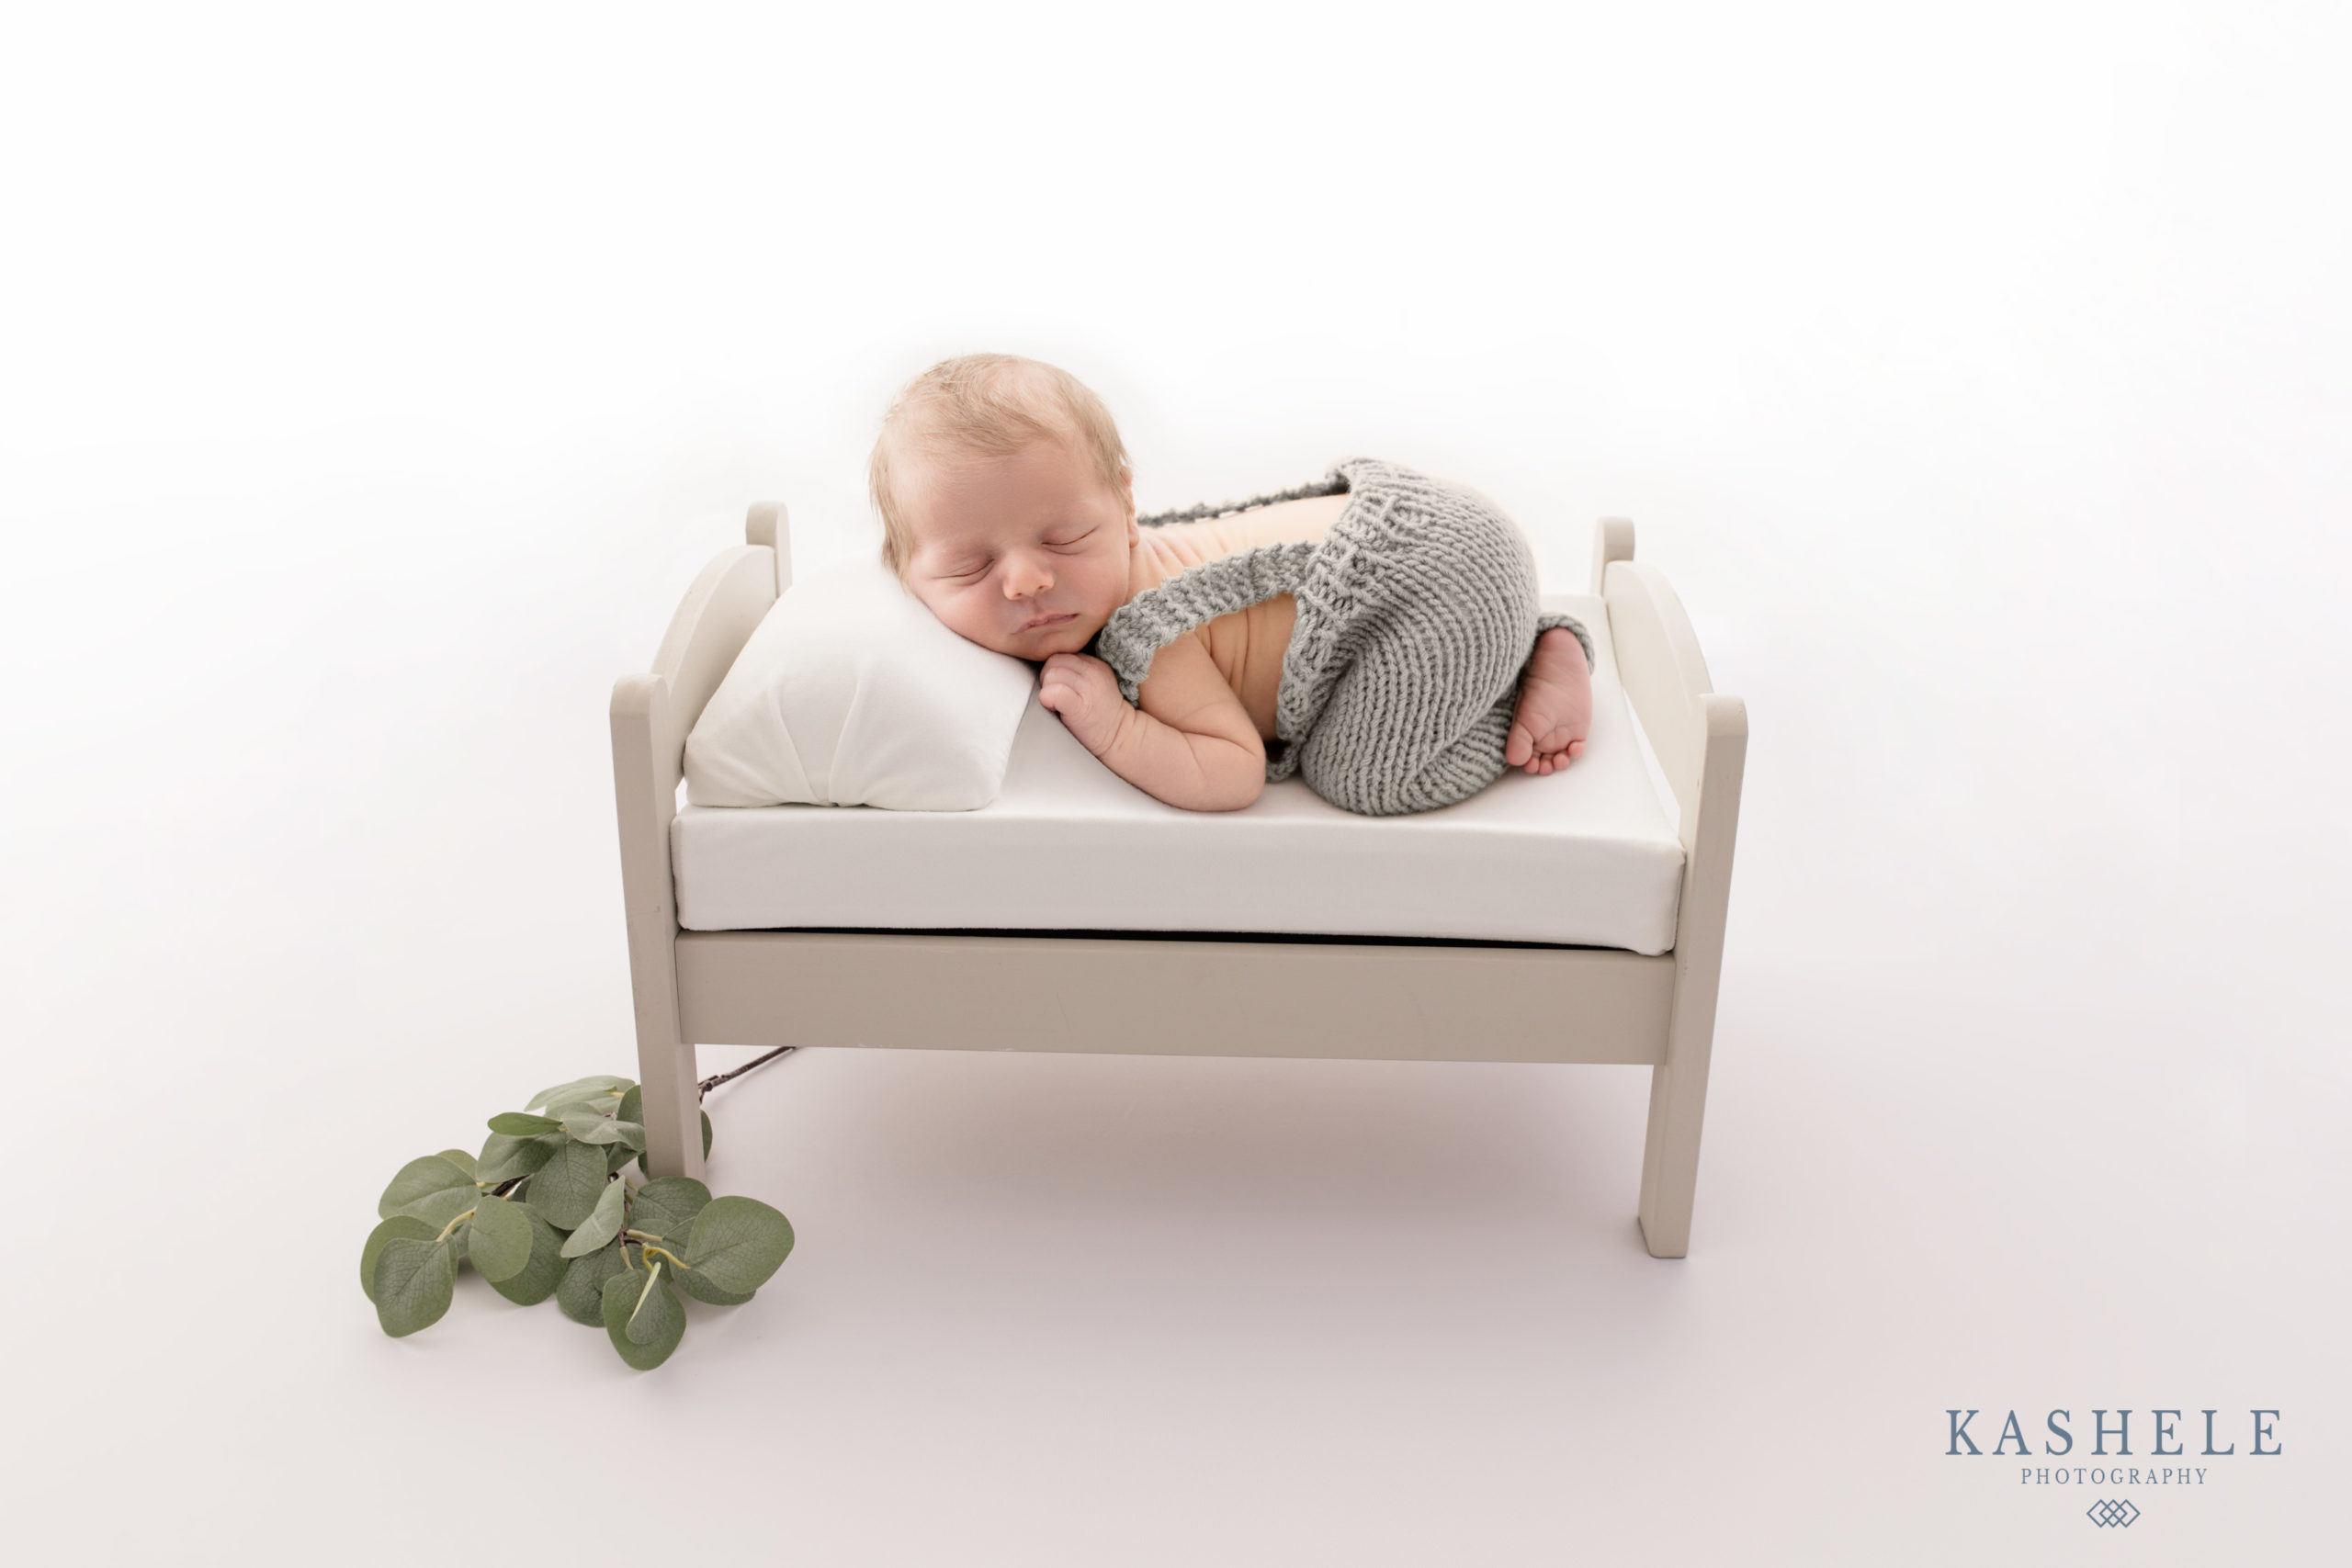 Ideas for Newborn Pictures with Siblings · Crabapple Photography